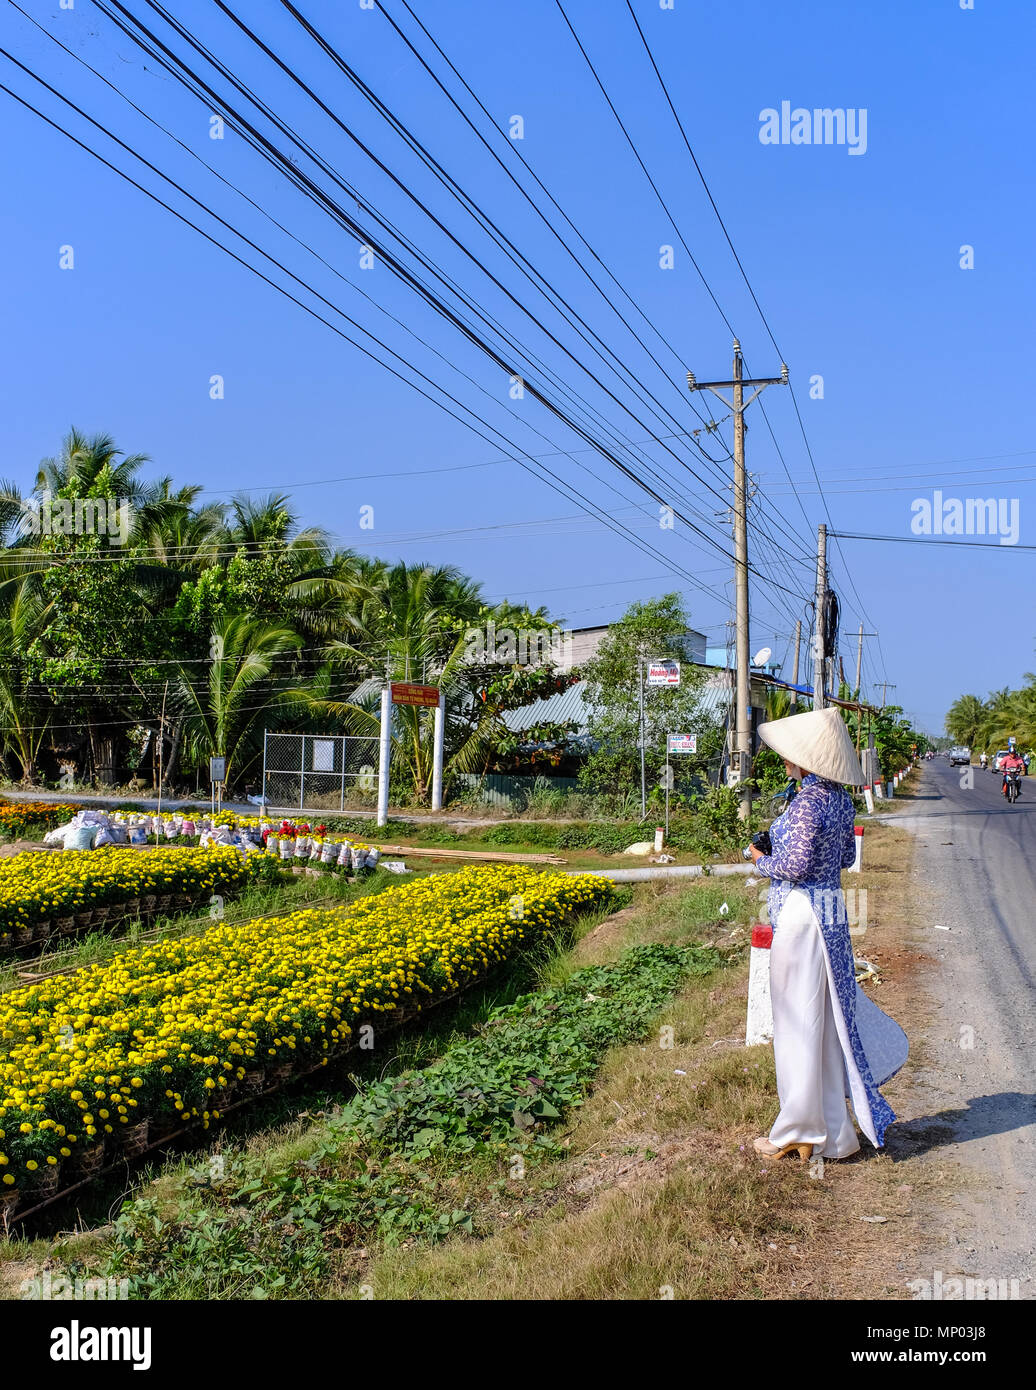 Can Tho, Vietnam - Jan 31, 2016. A woman standing on flower field at spring time in Can Tho, Vietnam. Stock Photo